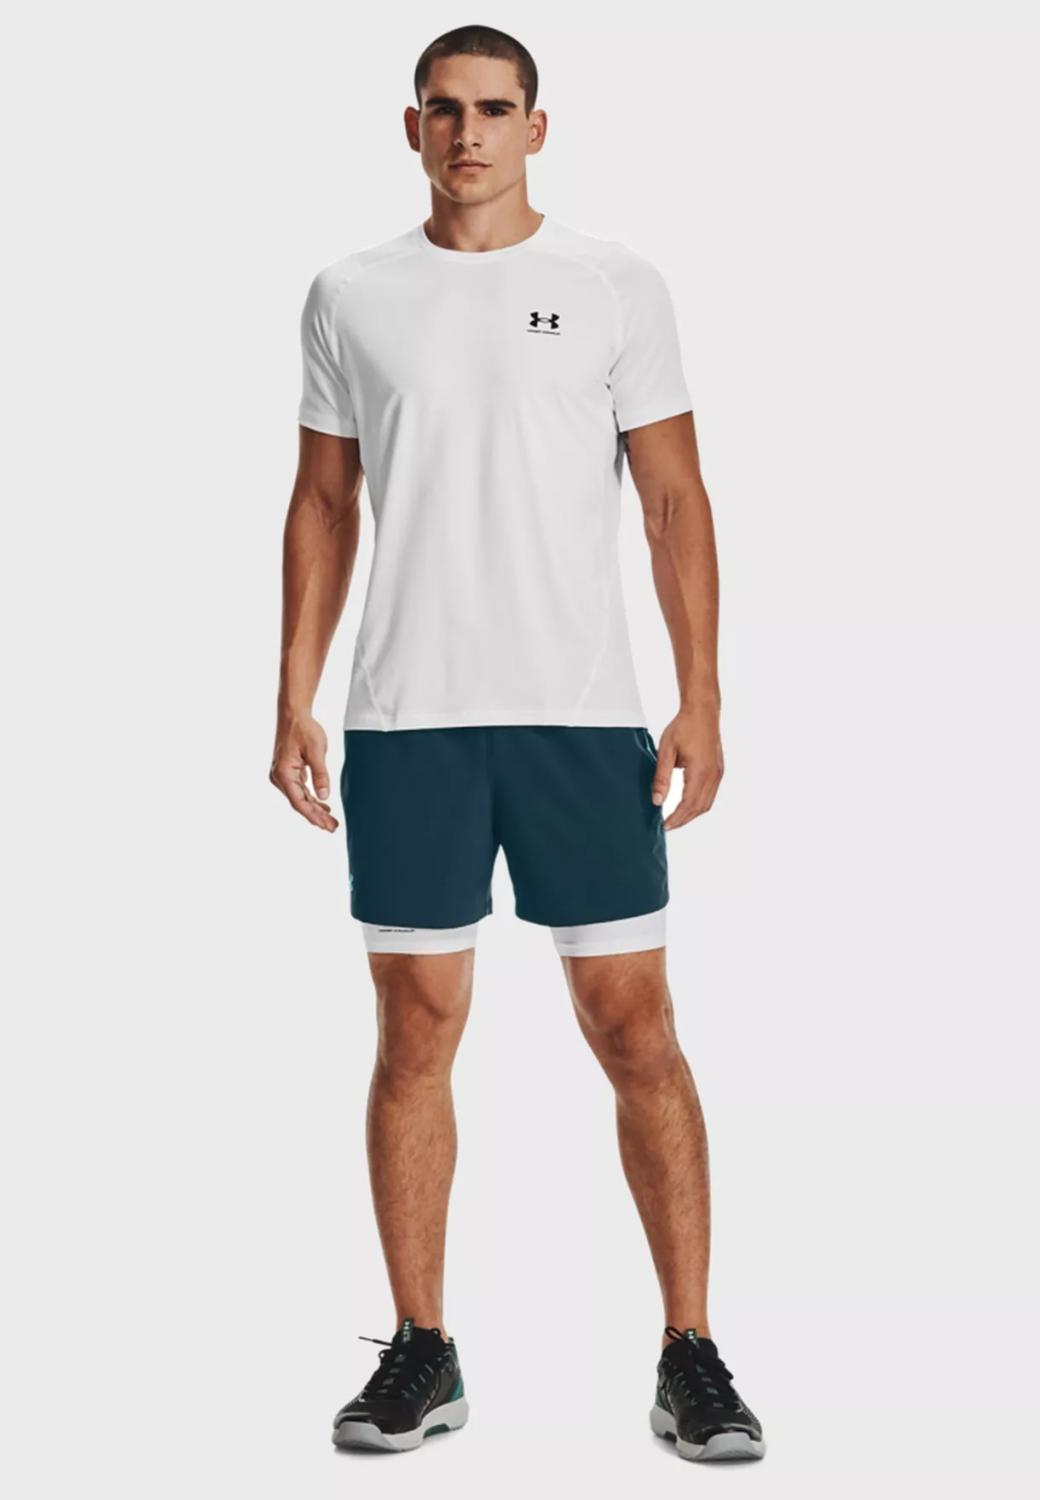 UNDER ARMOUR: HG SHORTS COMPRESSION WHITE - ARMOUR